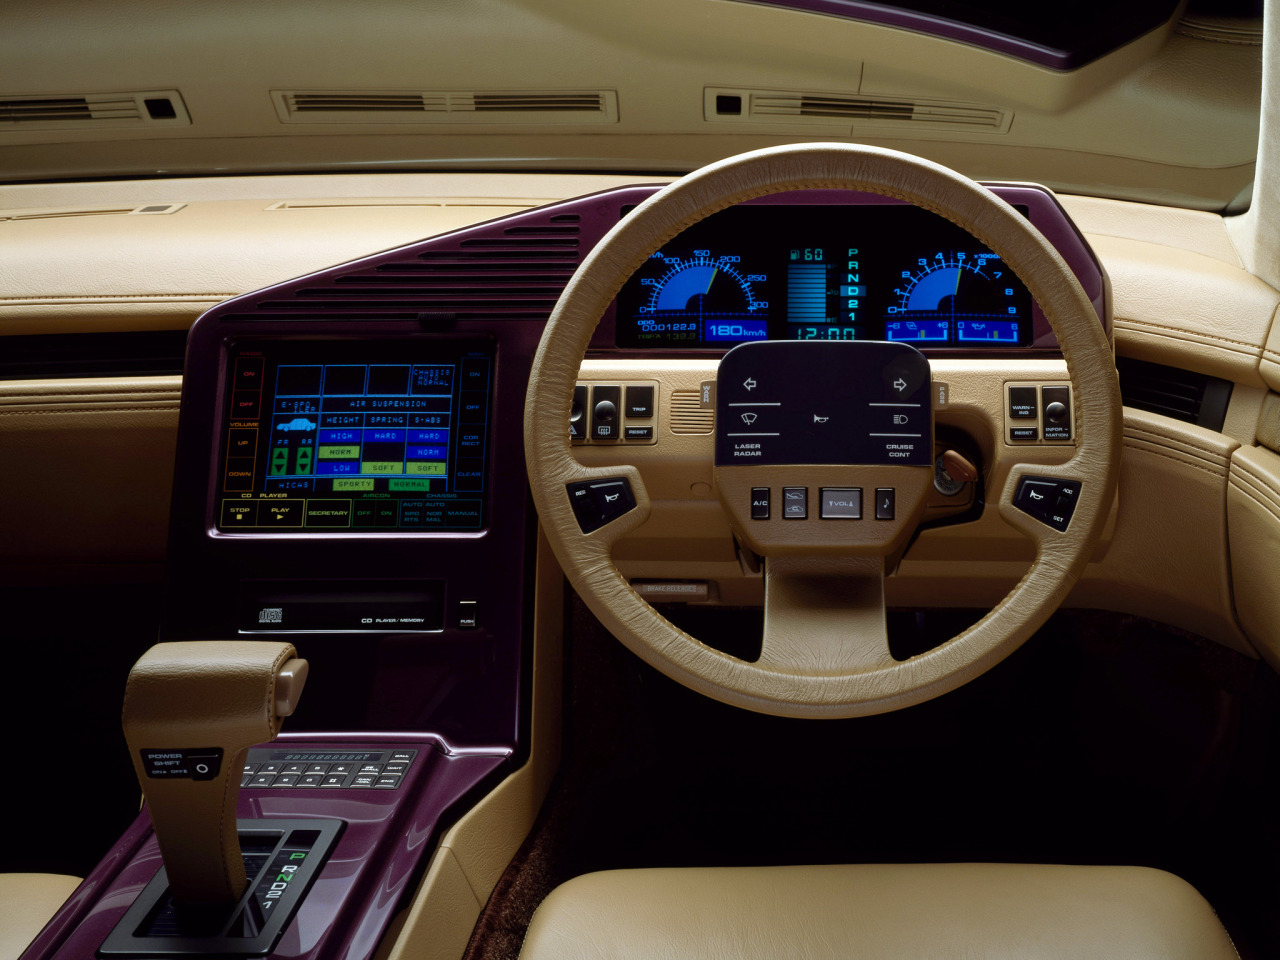 Interior of the 1985 Nissan CUE-X concept